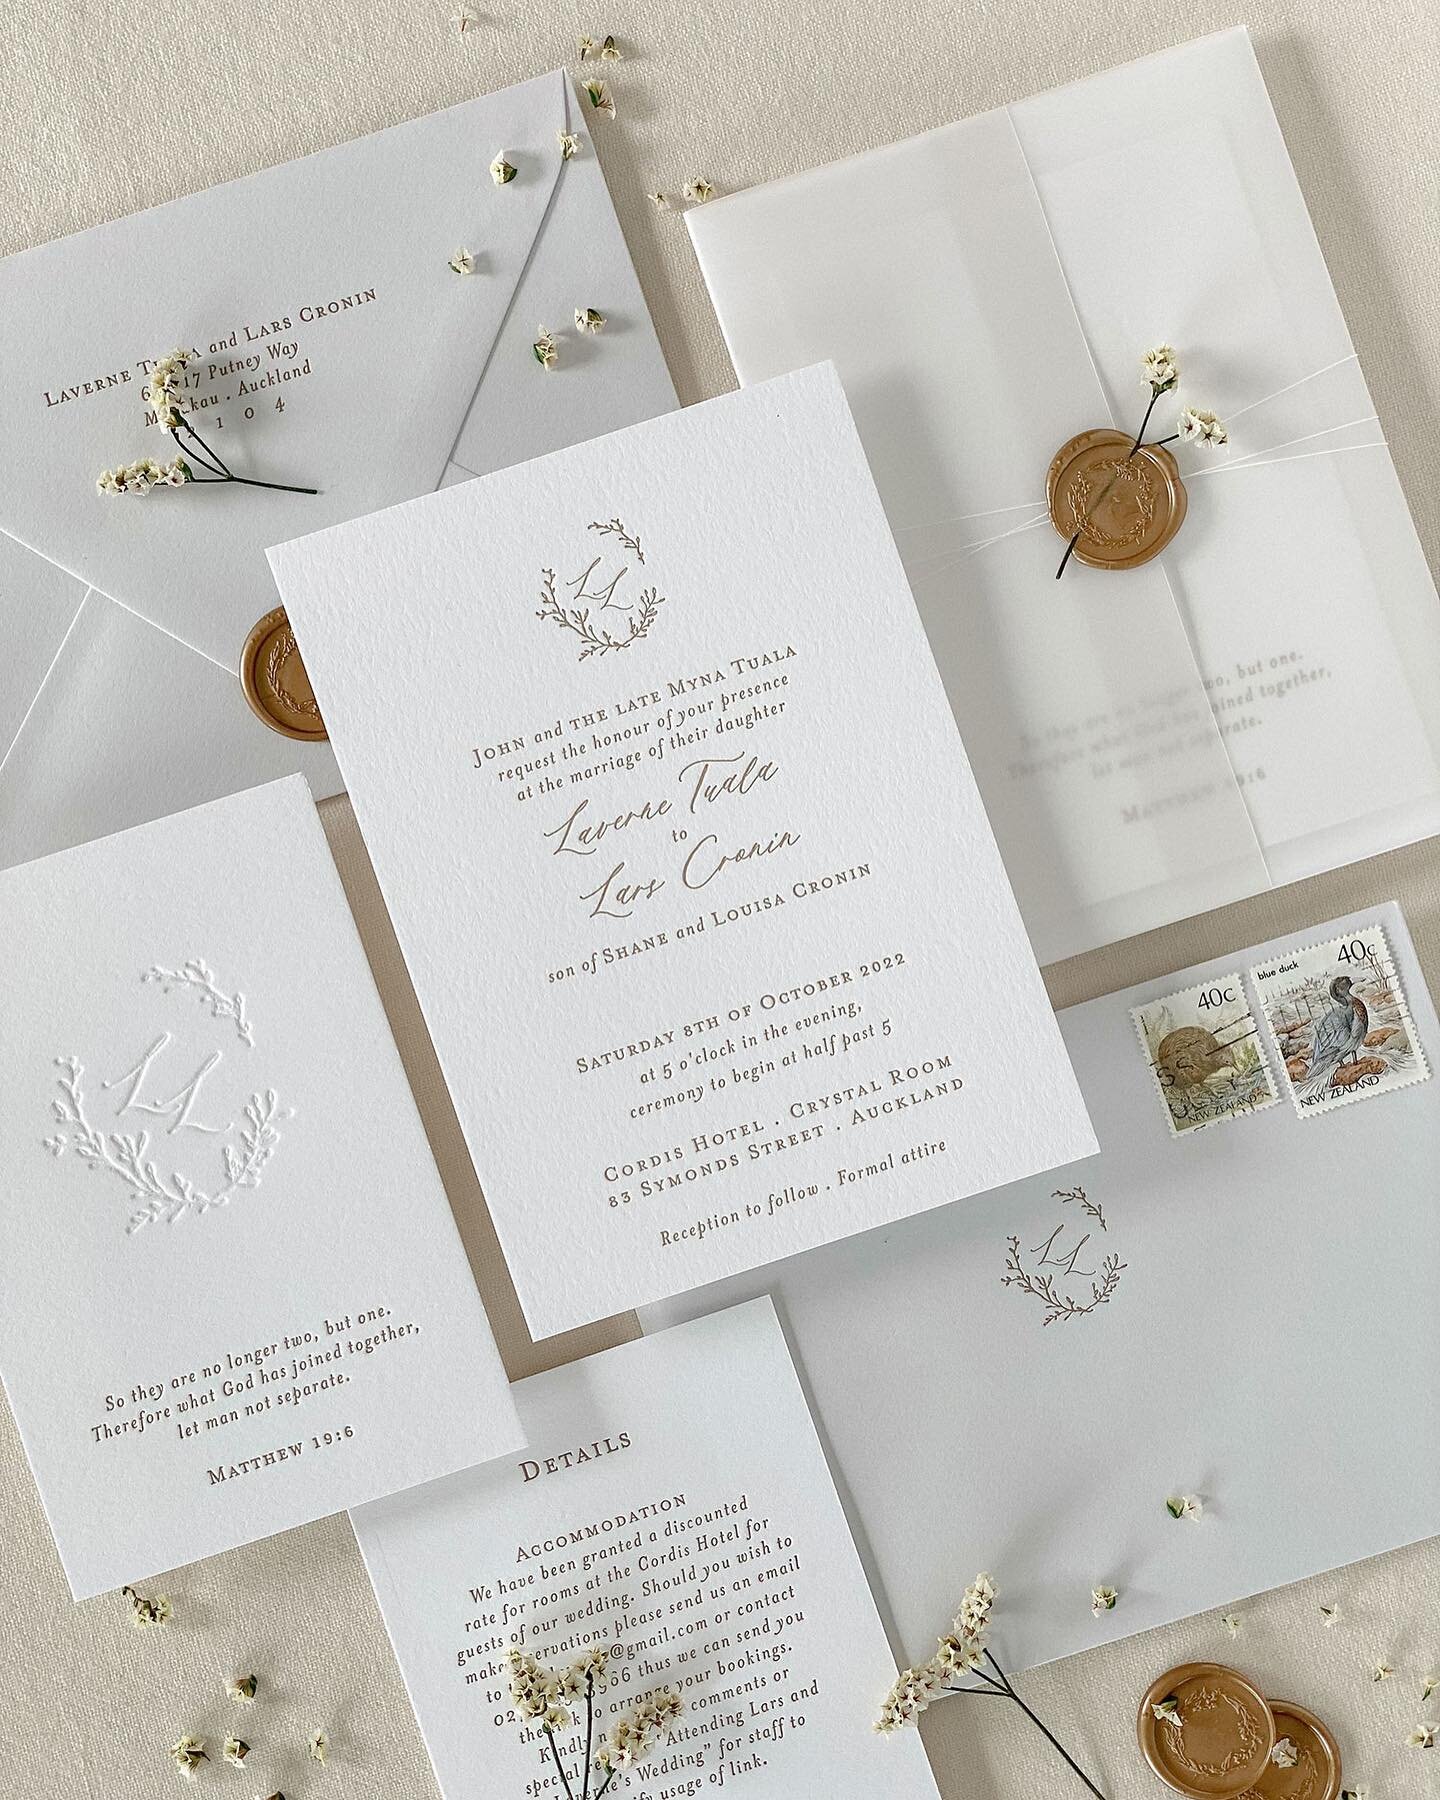 The Monogram Suite for Laverne and Lars, gold ink and blind deboss details on double thick cotton stock with cool grey envelopes. Customised with a vellum wrap and secured with fine paper twine, gold wax seal and preserved floral sprigs ✨
~
#Inkertin